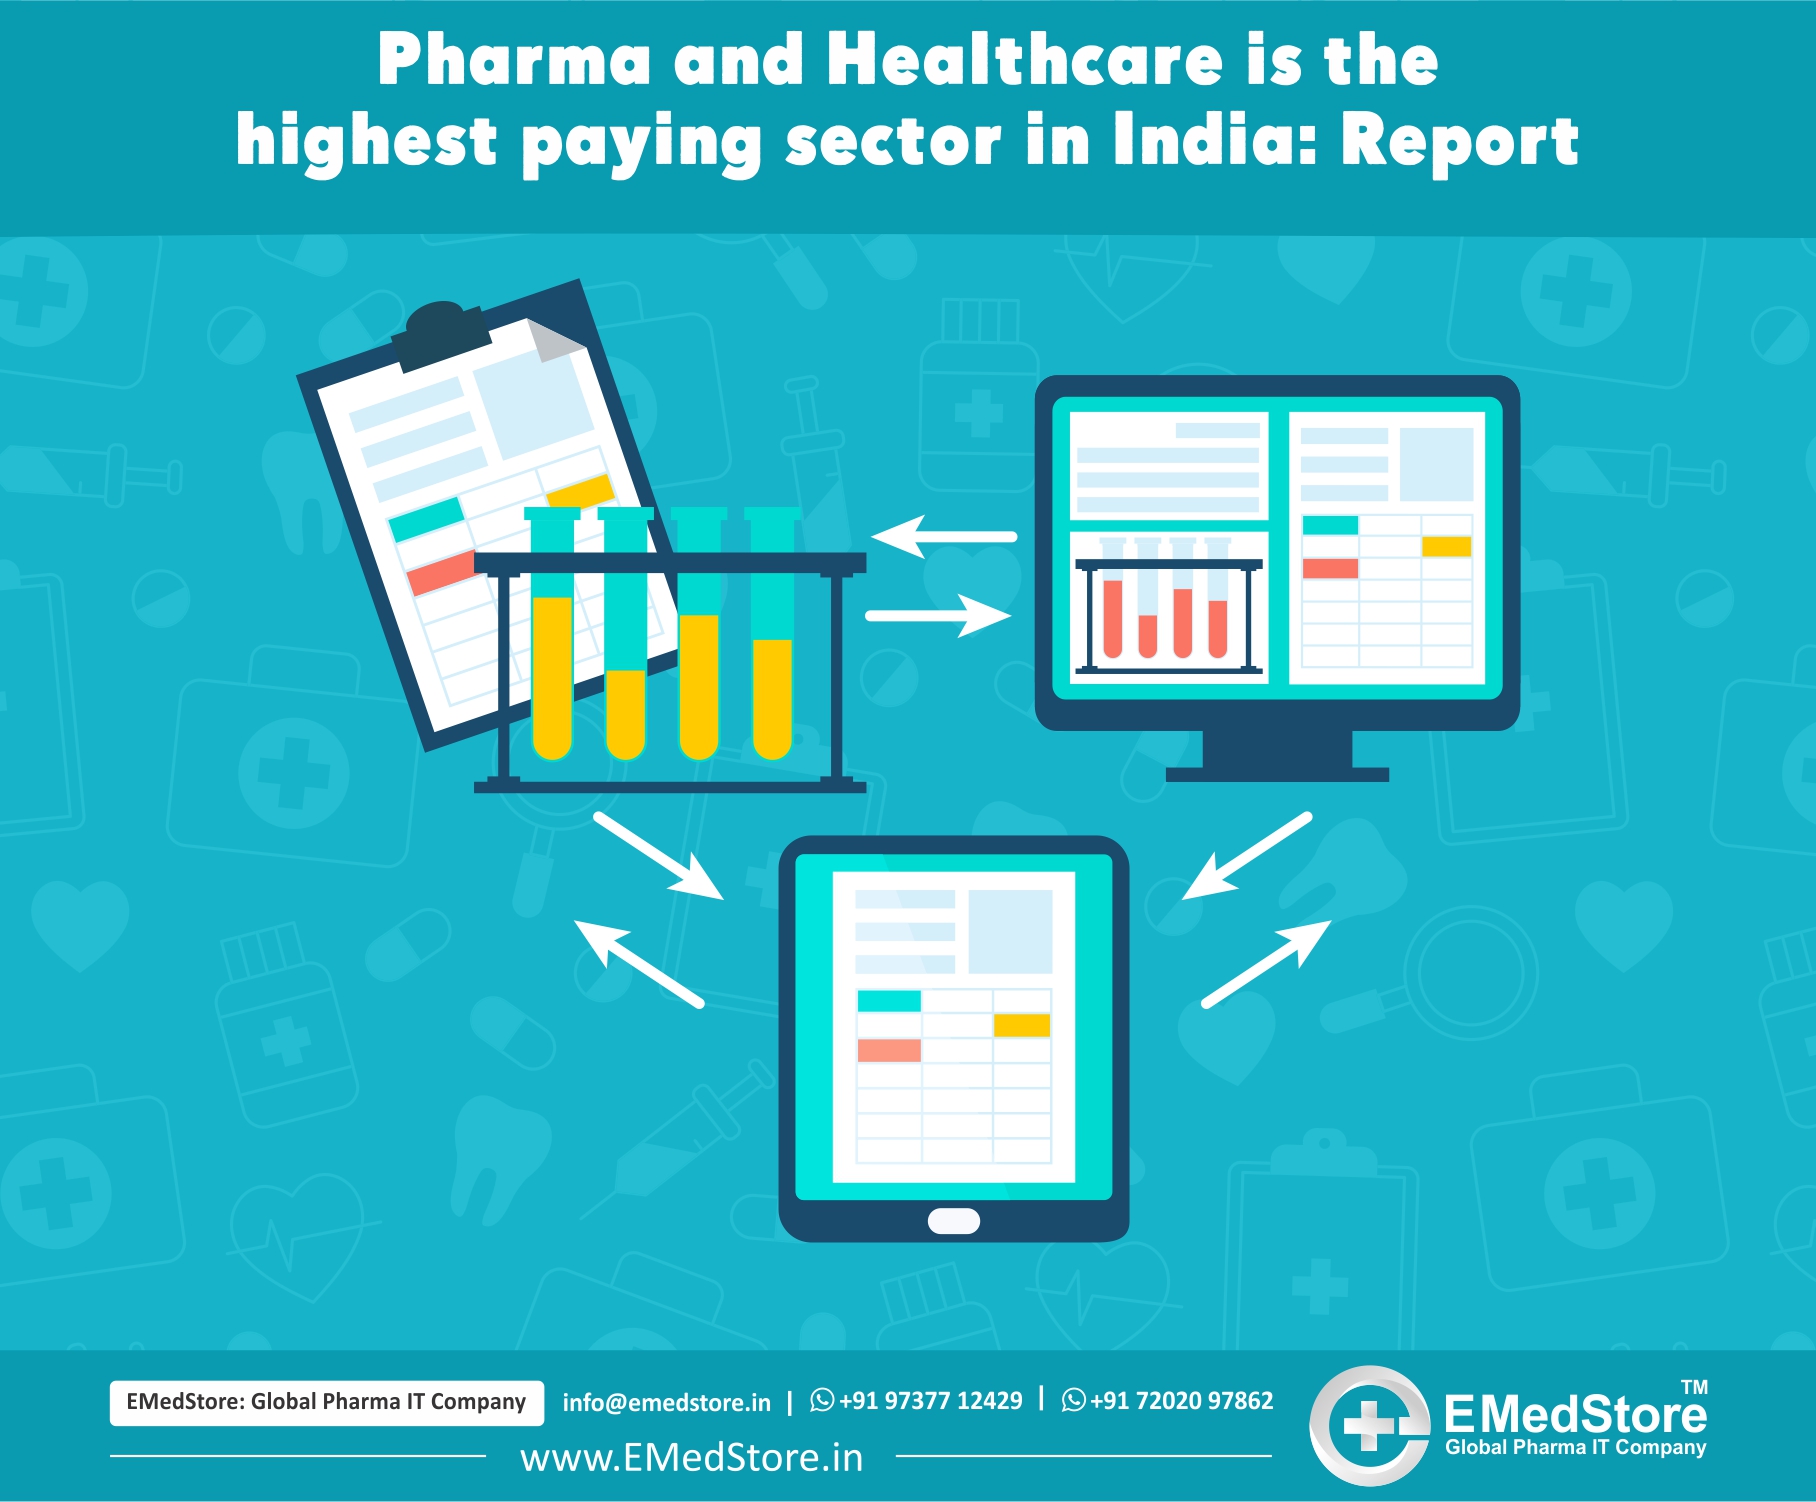 Pharma and Healthcare is the highest paying sector in India: Report